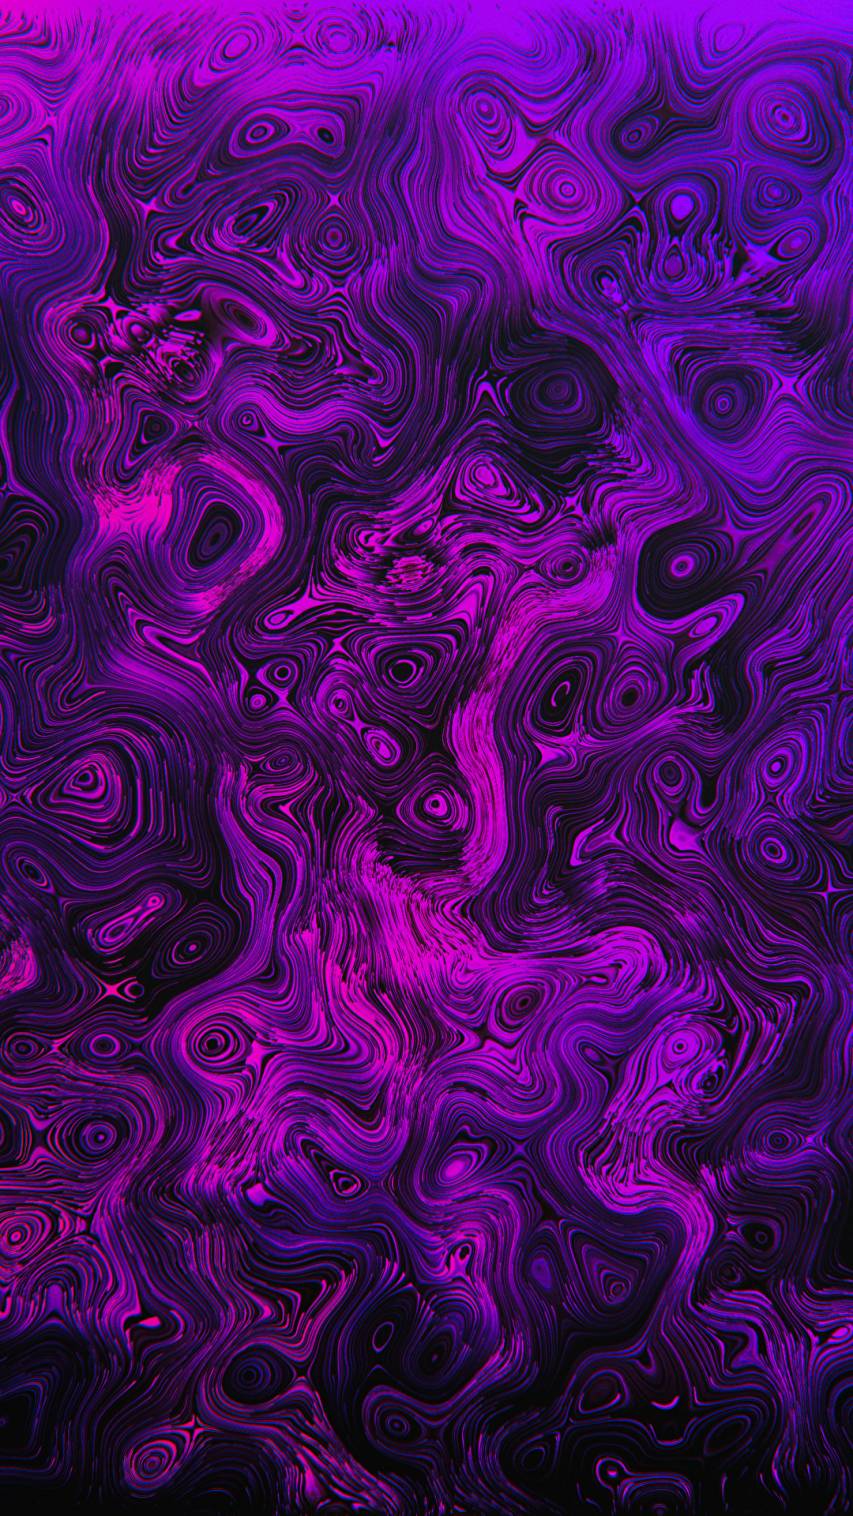 Collection of Psychedelic Wallpaper for Your iPhone Devices